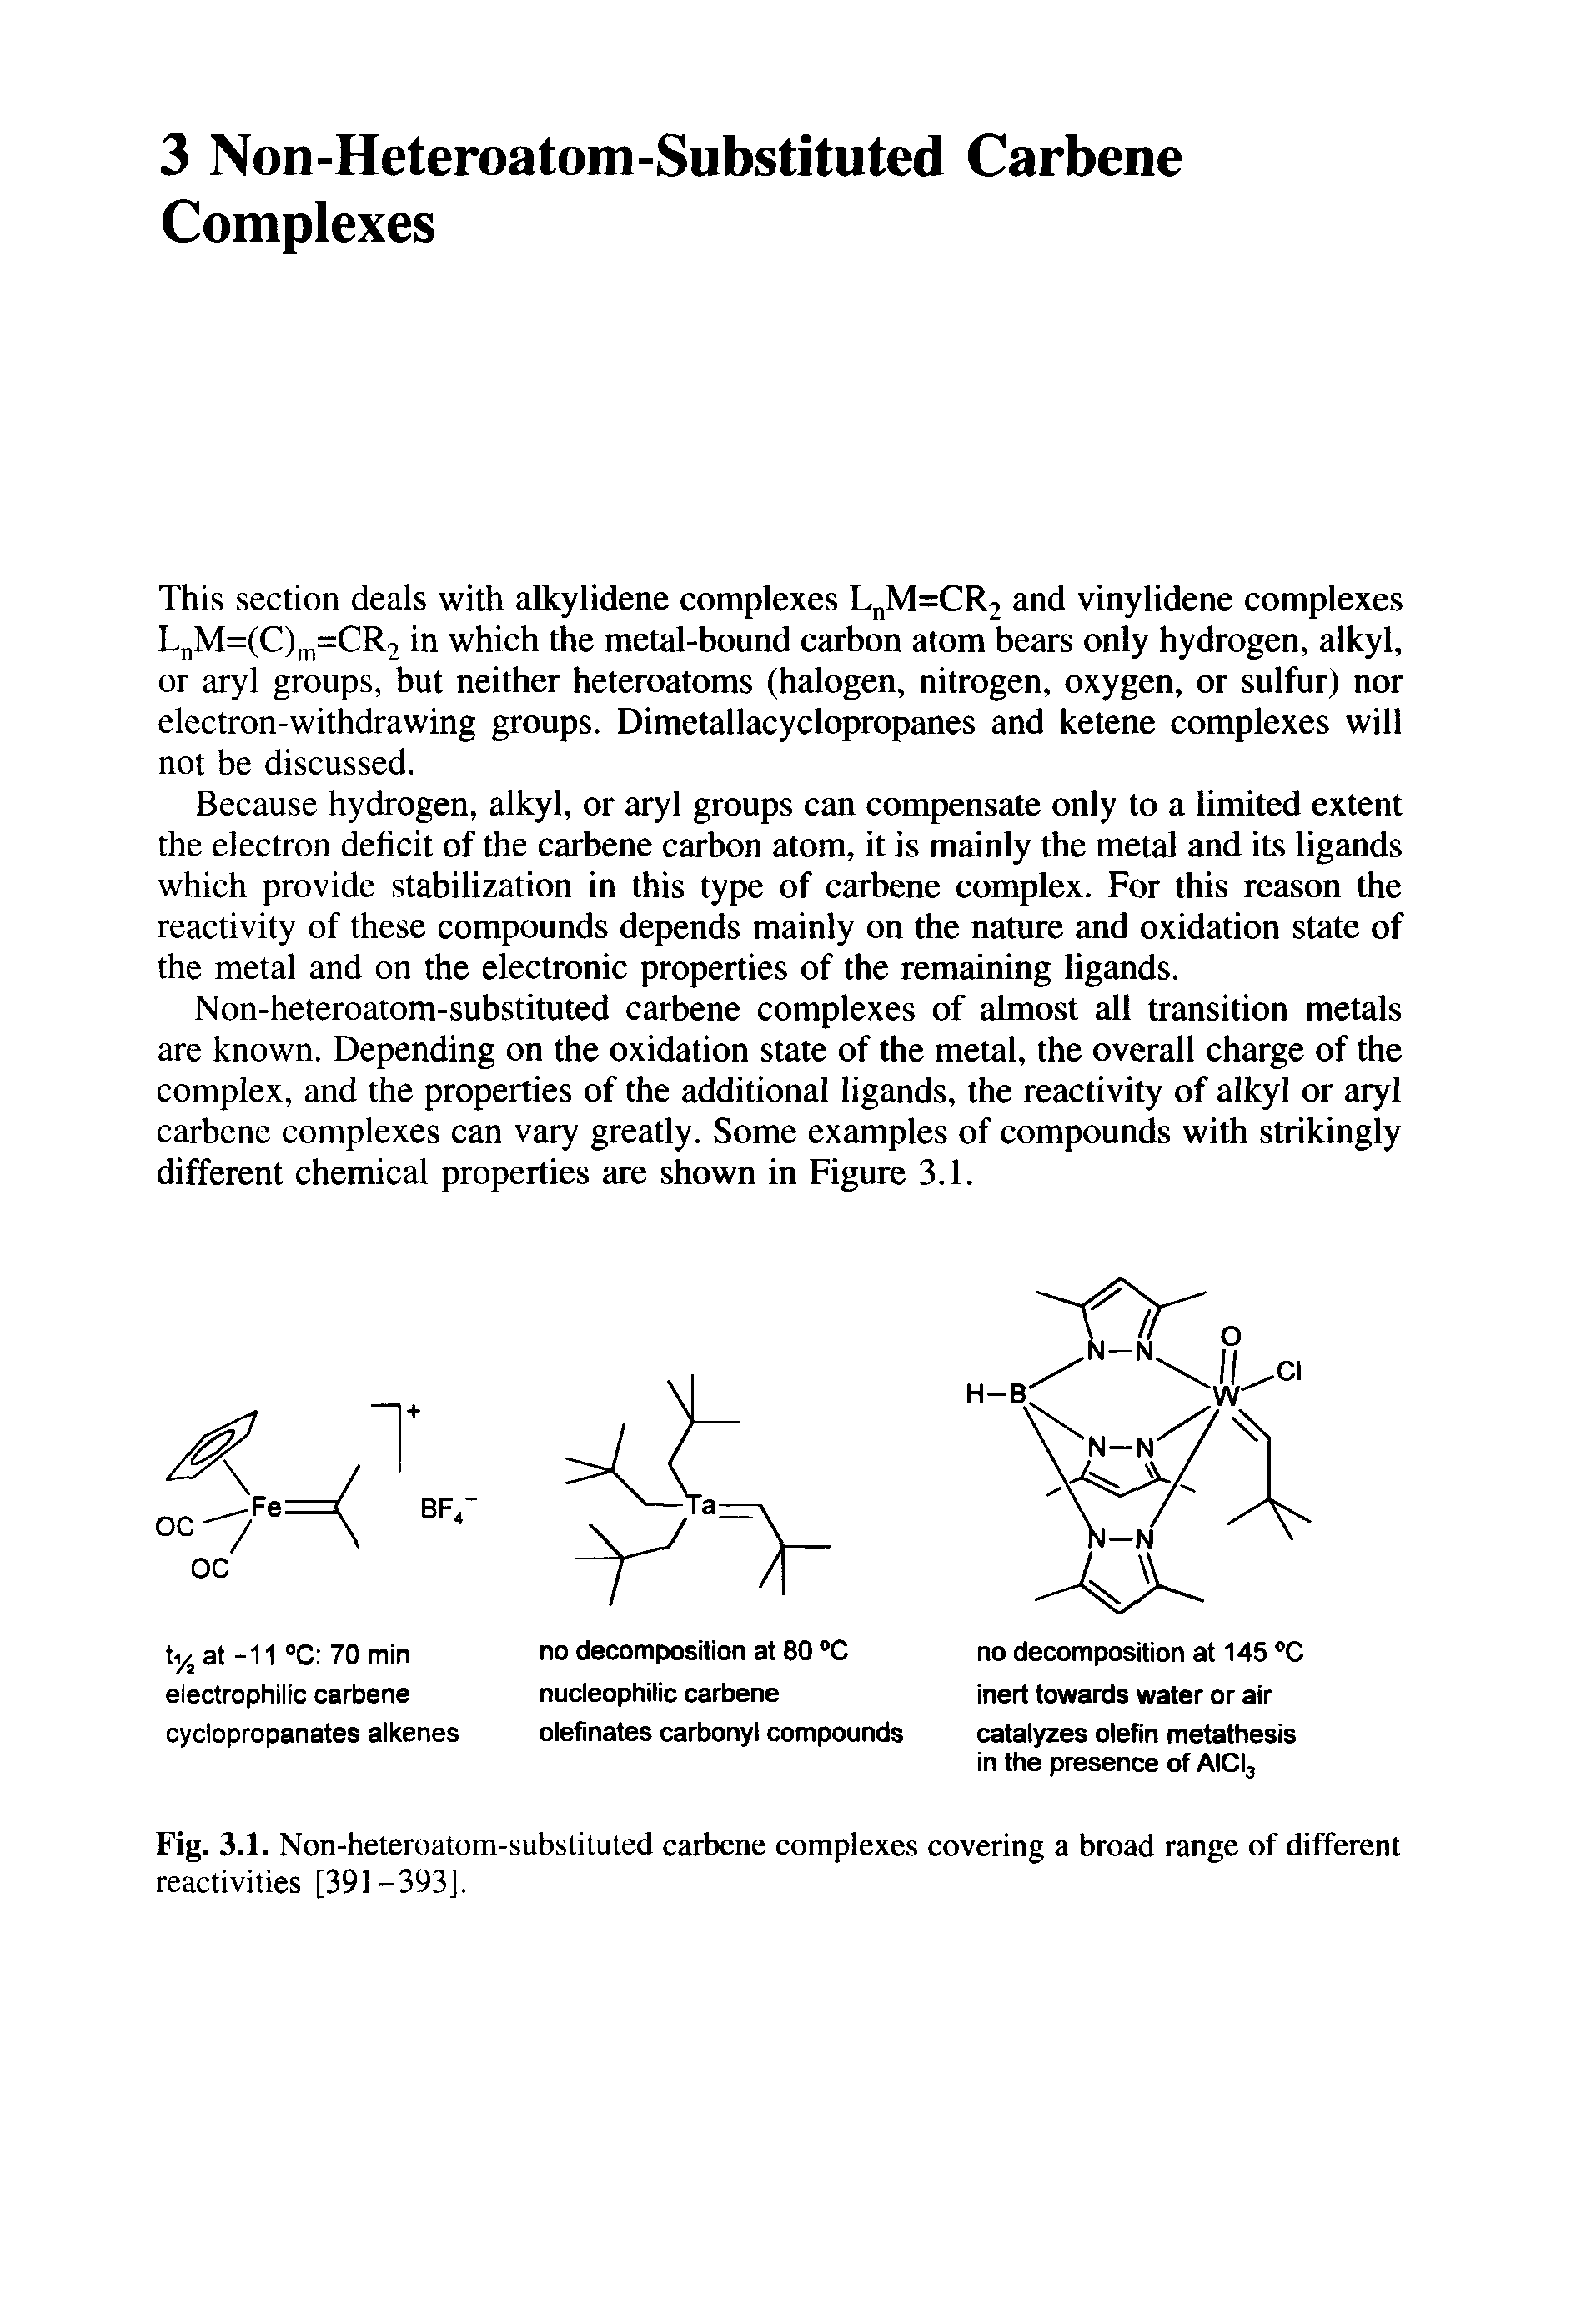 Fig. 3.1. Non-heteroatom-substituted carbene complexes covering a broad range of different reactivities [391-393].